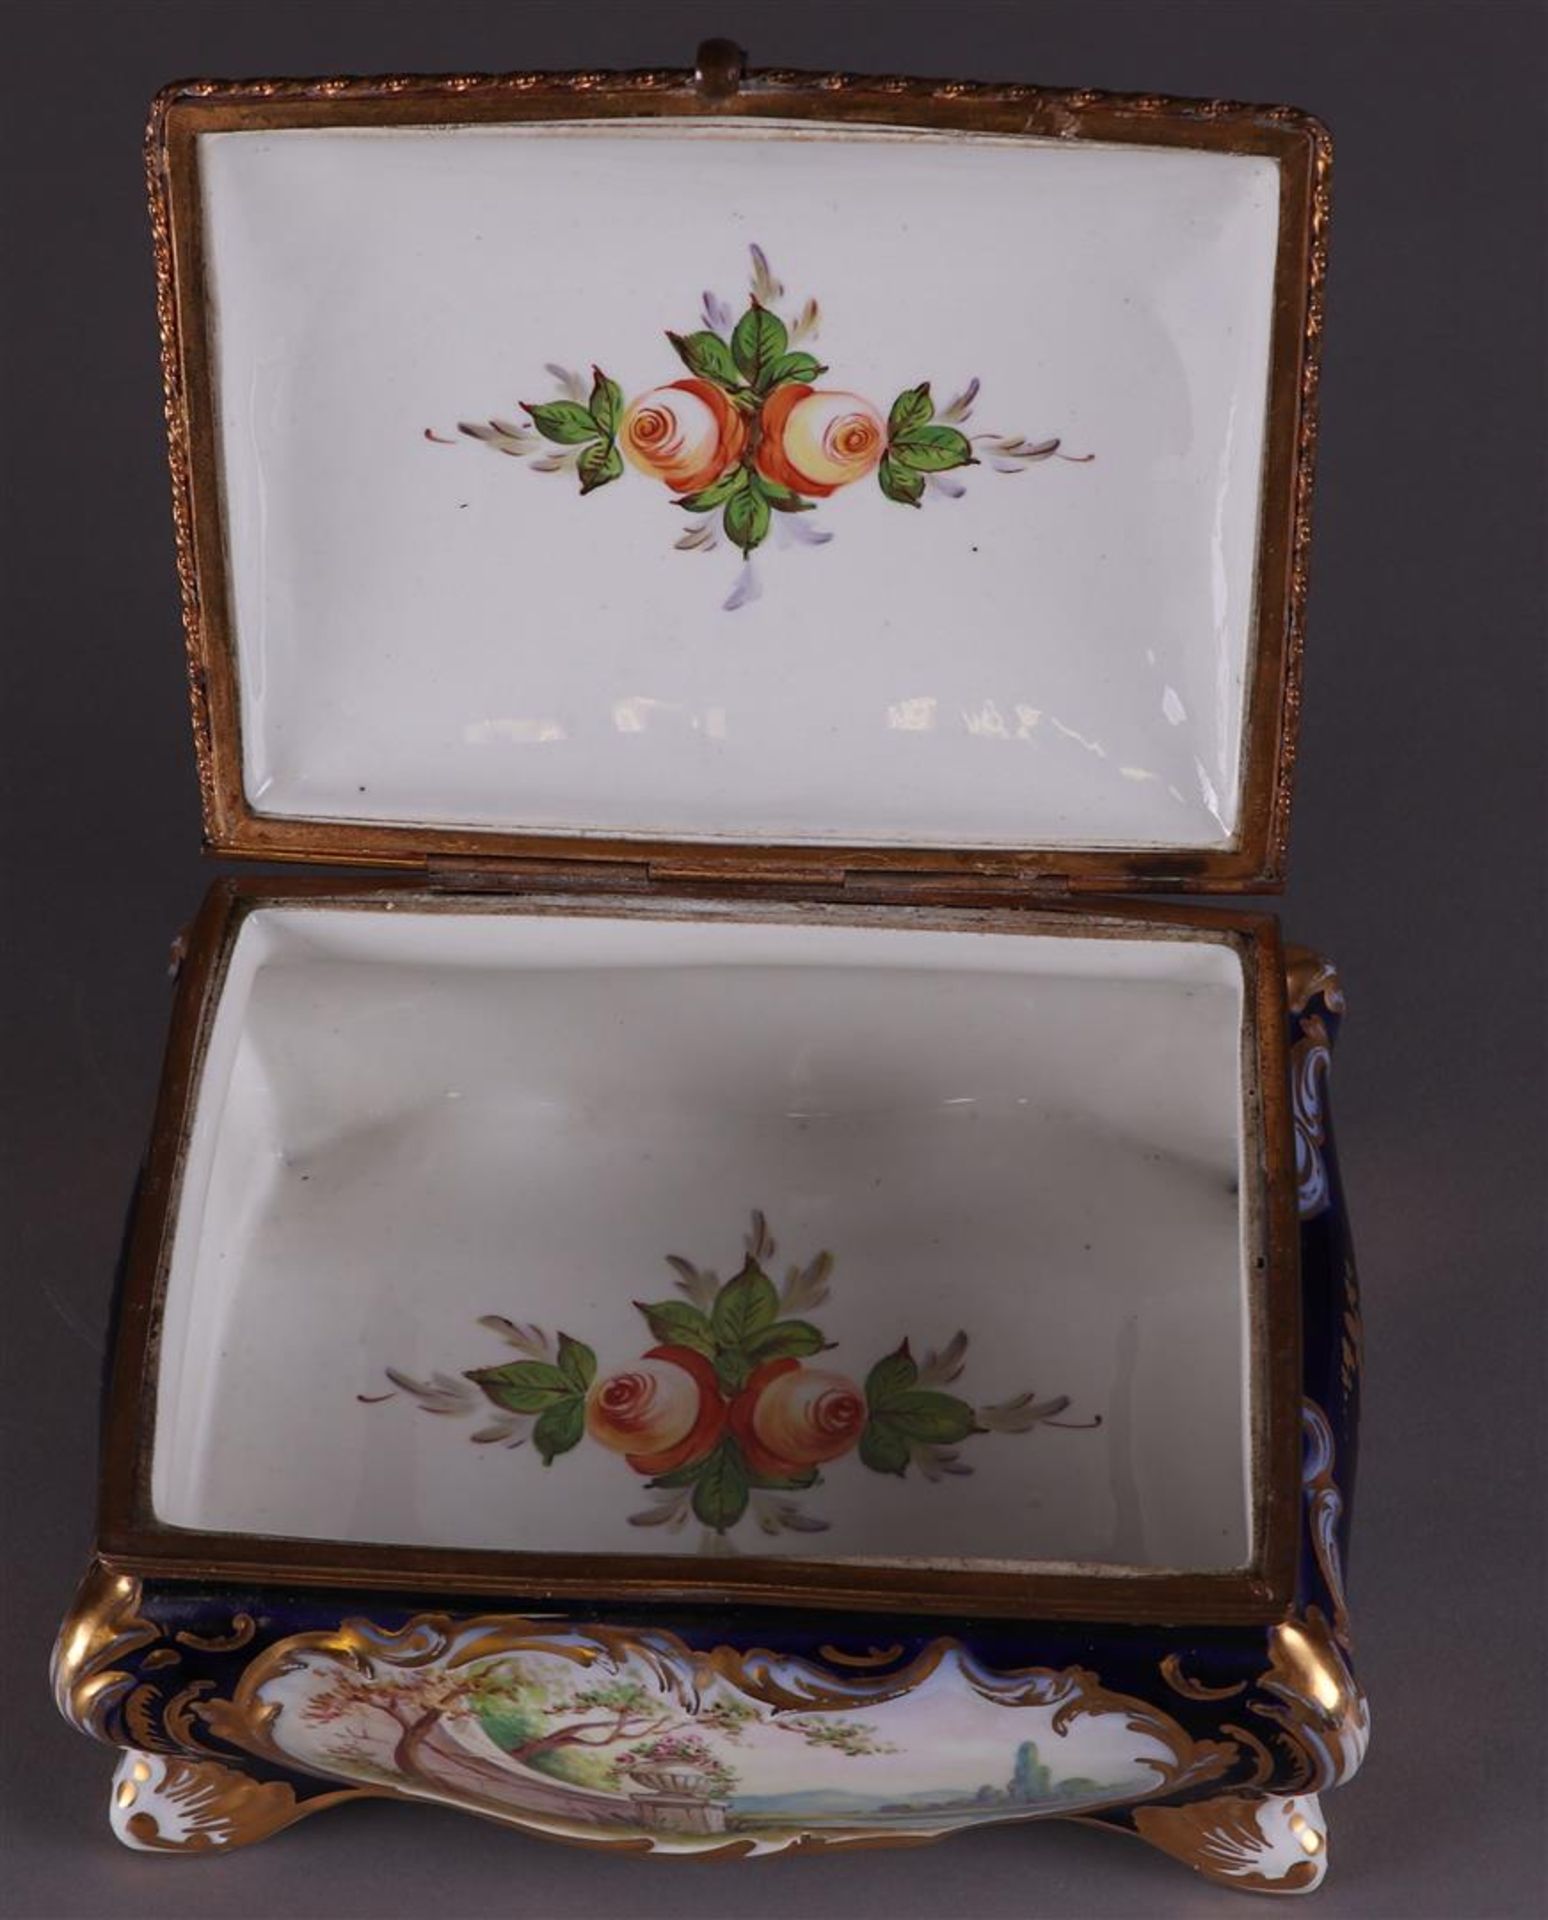 A porcelain lidded box with a romantic scene. France, ca. 1900 - Image 2 of 3